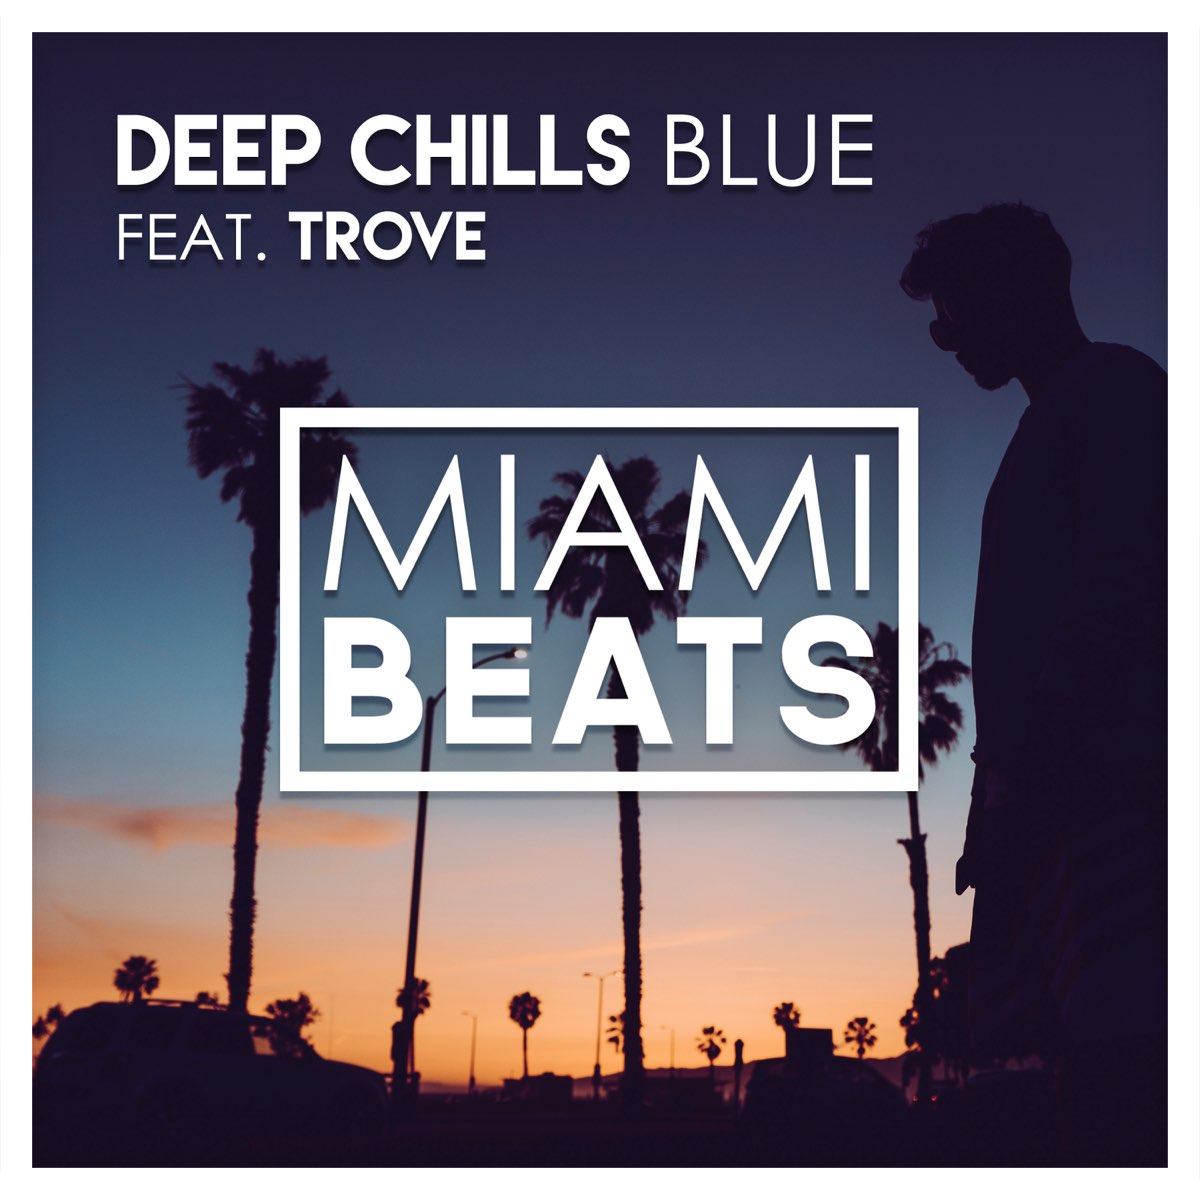 Chill blues. Deep Chill. Miami Beats. Blue featuring. Deep Chills feat. Ivie.